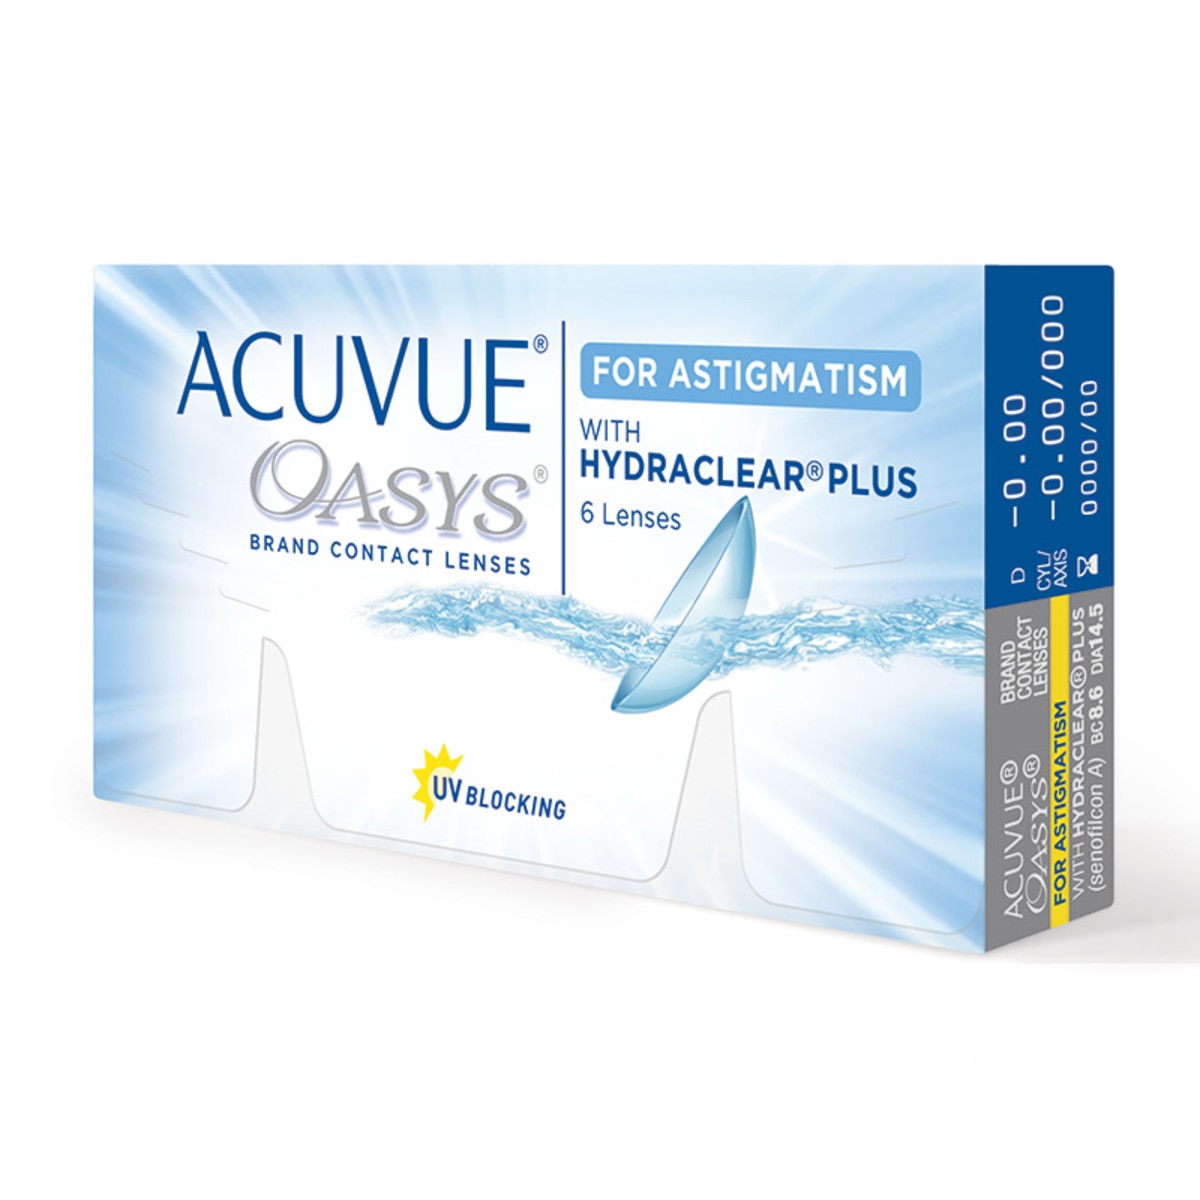 ACUVUE OASYS® con HYDRACLEAR Plus® para Astigmatismo (D -8, Cyl/Axis -0.75/20)